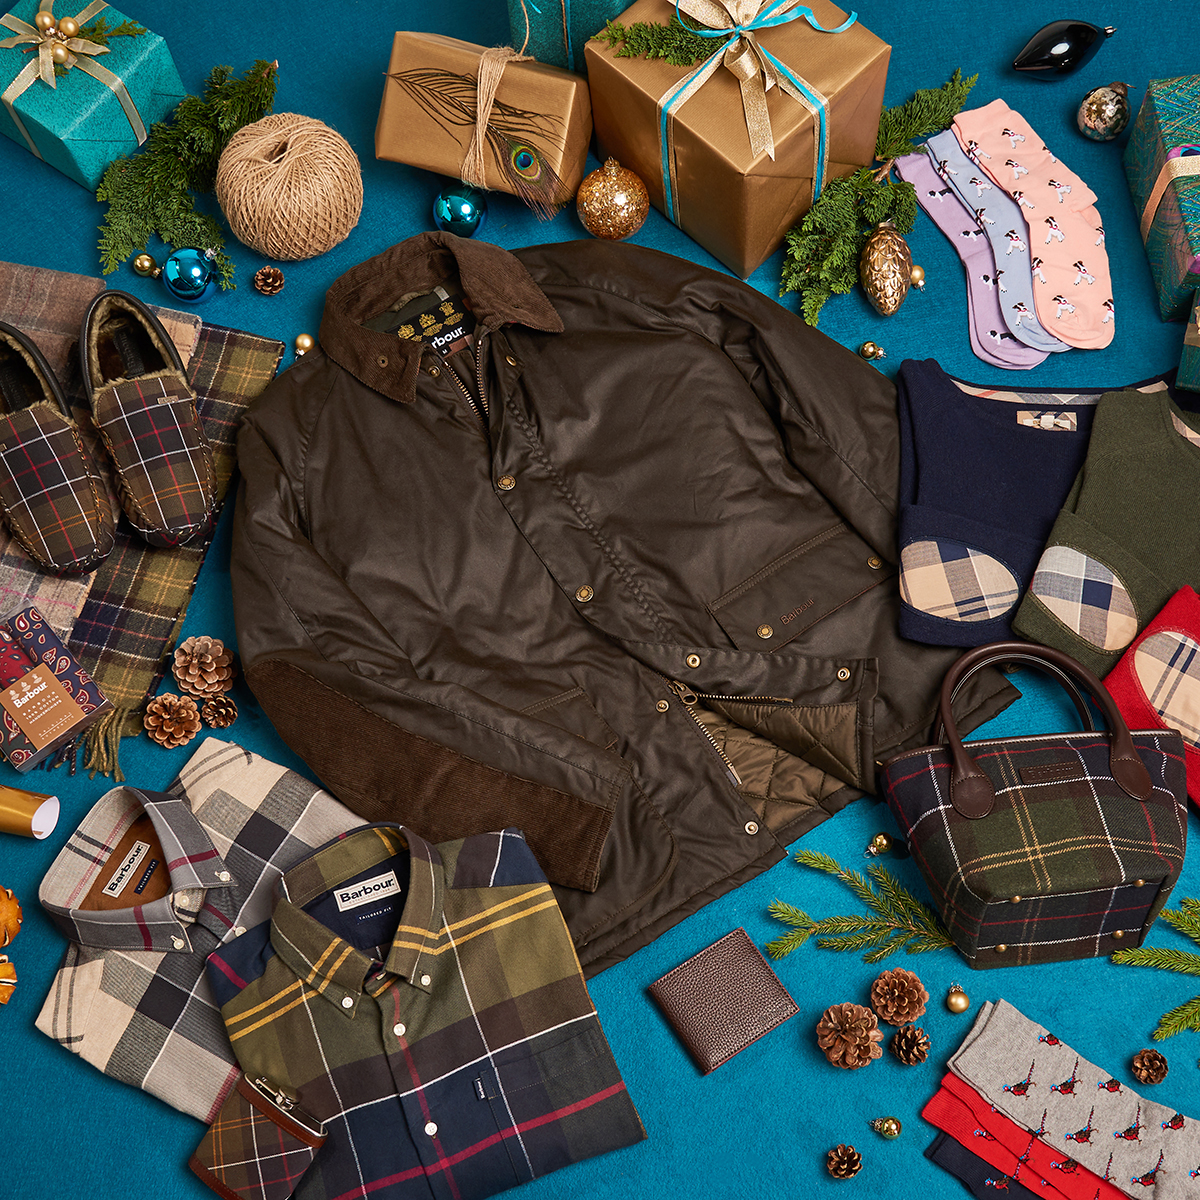 Quilted Jackets - Mens | Barbour